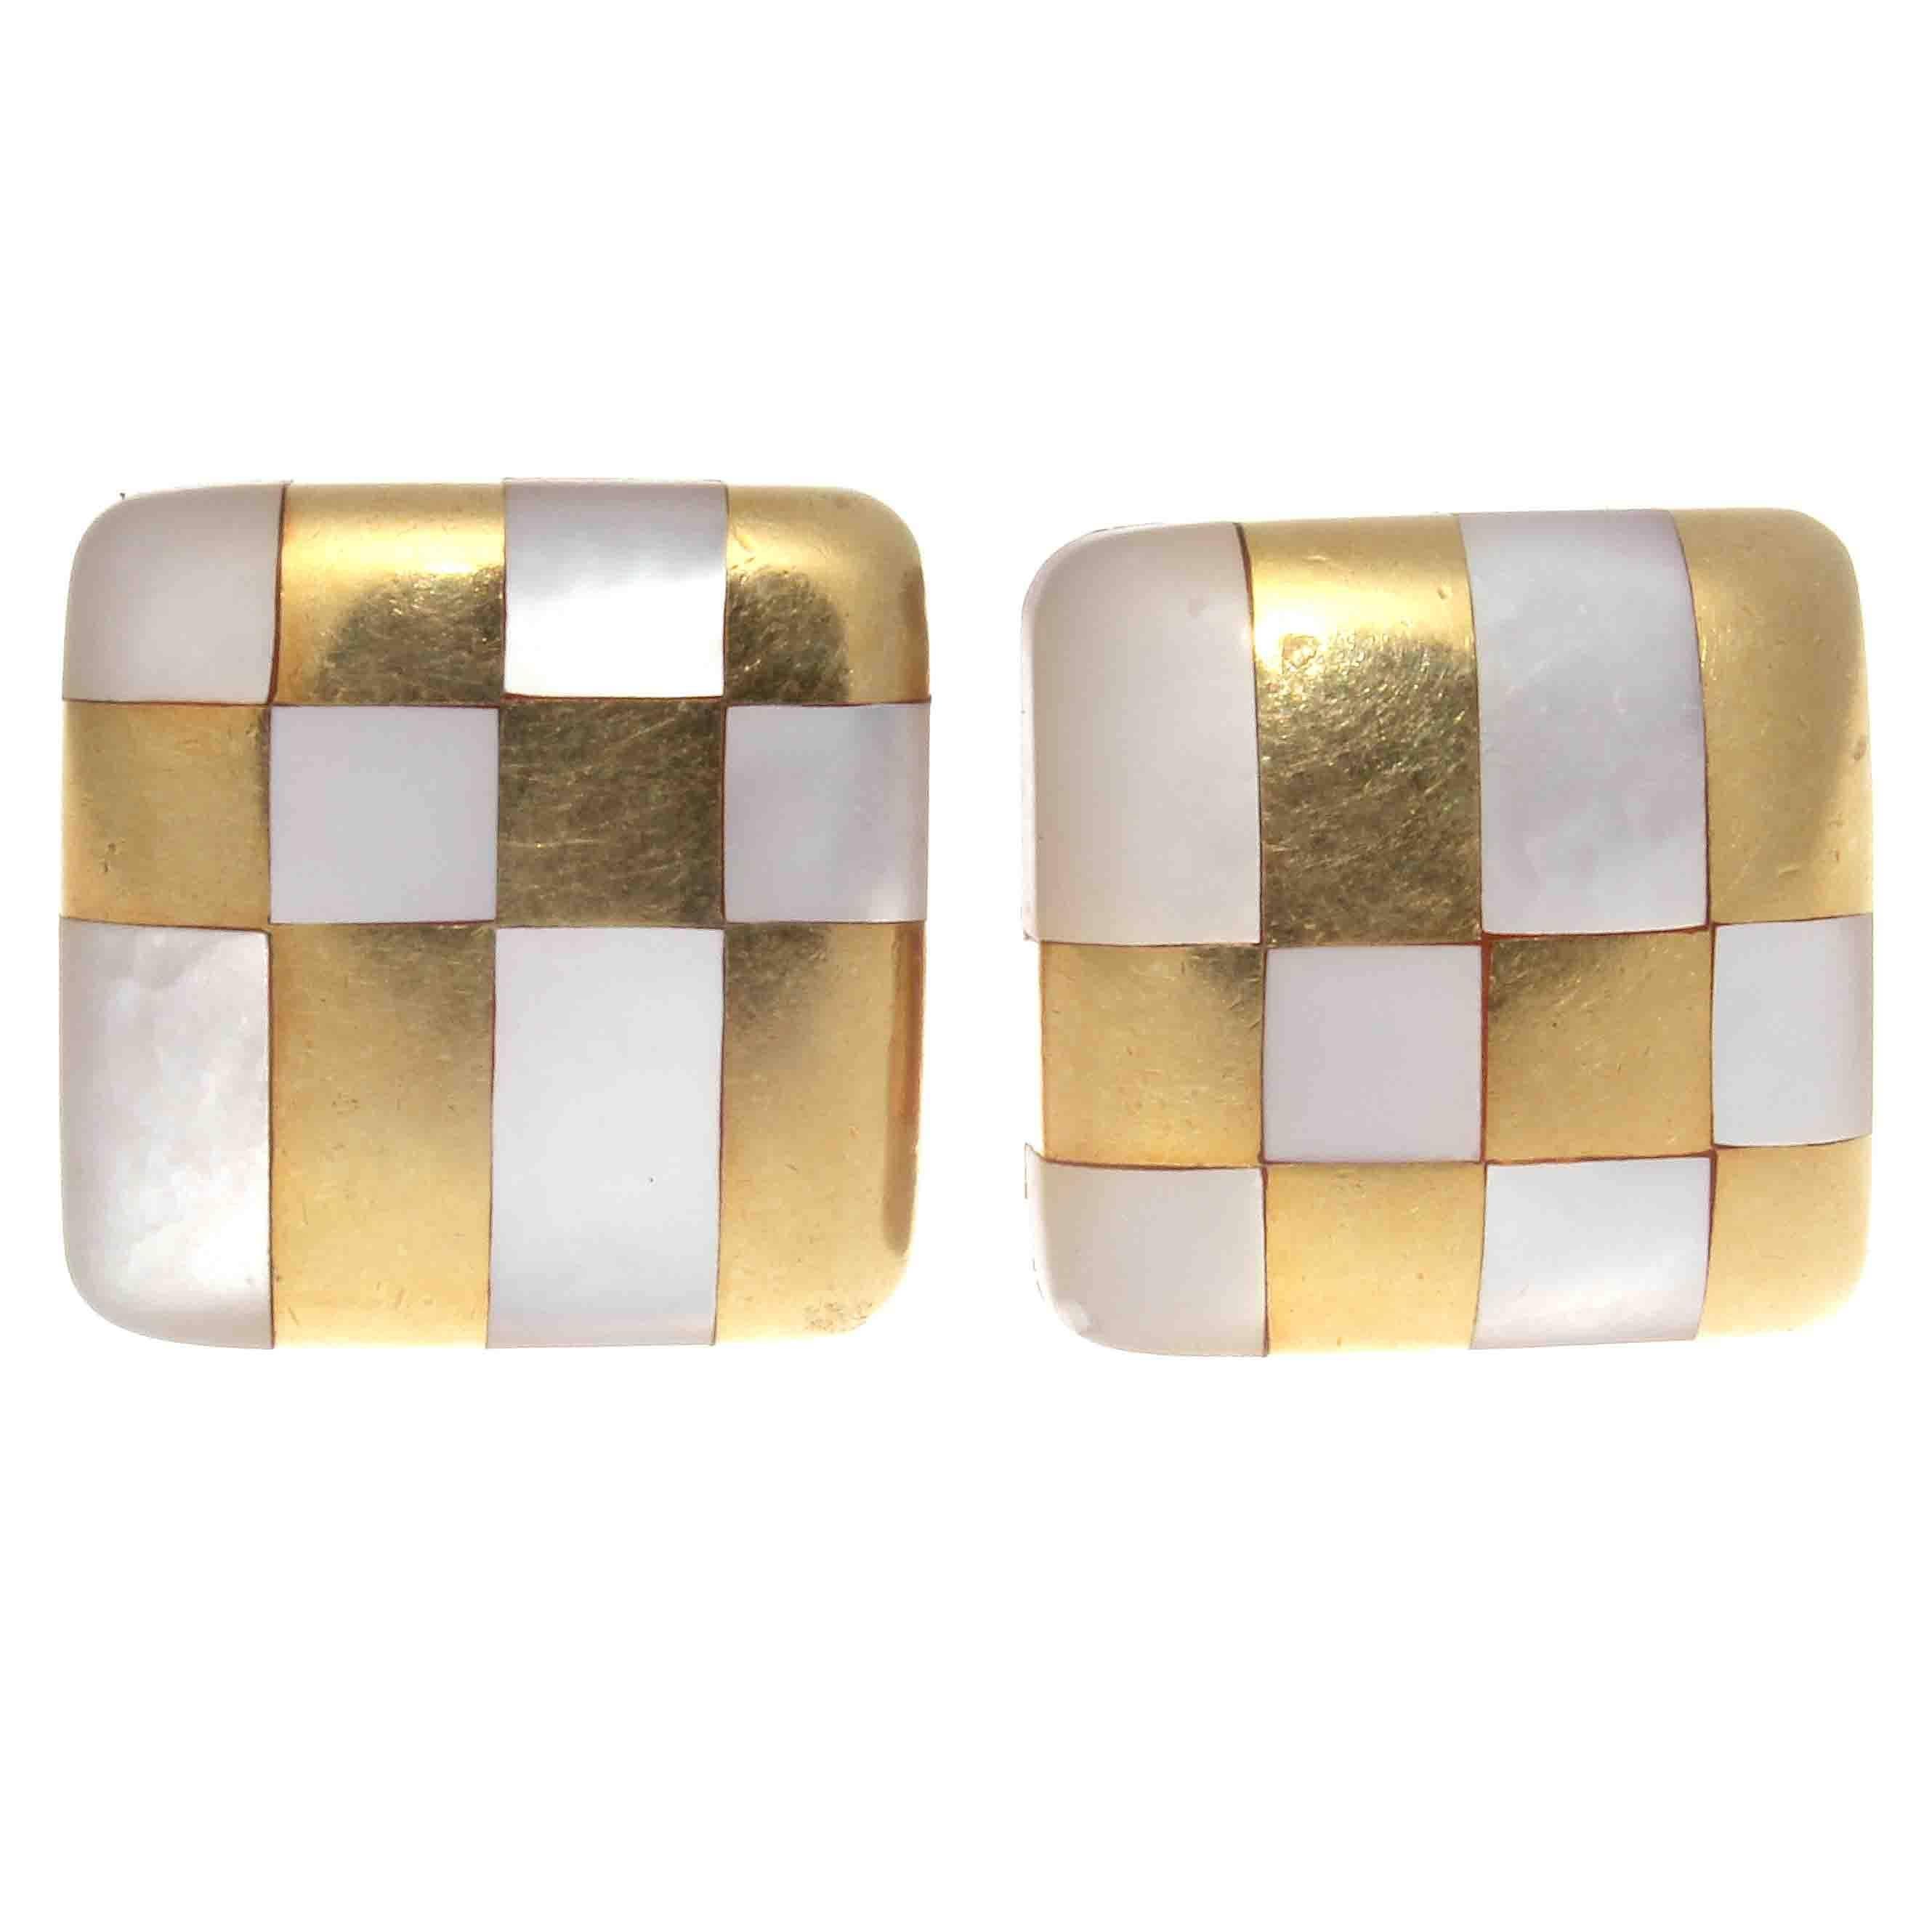 A brilliantly graceful design from one the most iconic jewelry houses. Featuring a checkerboard of pure white mother of pearl intertwined with alternating glistening 18k yellow gold. Signed T&Co